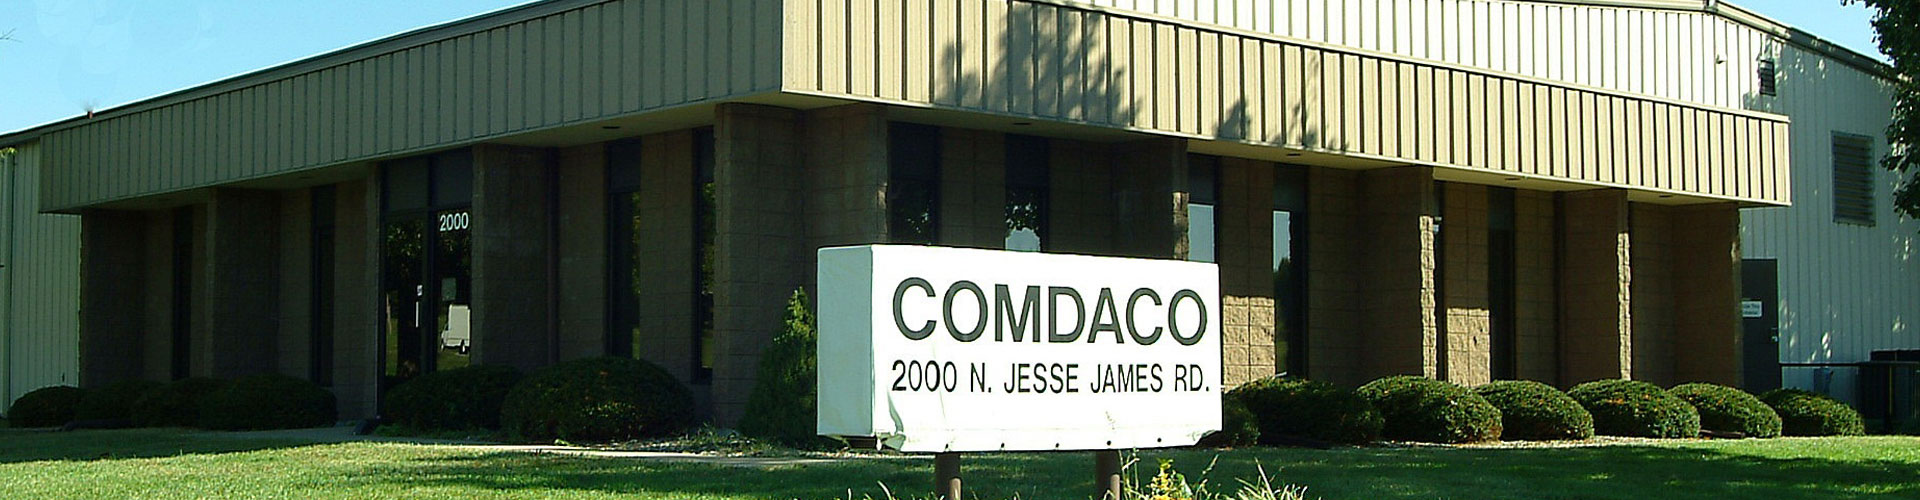 Privacy Policy for Comdaco Rubber Manufacturing Services in Kansas City Missouri